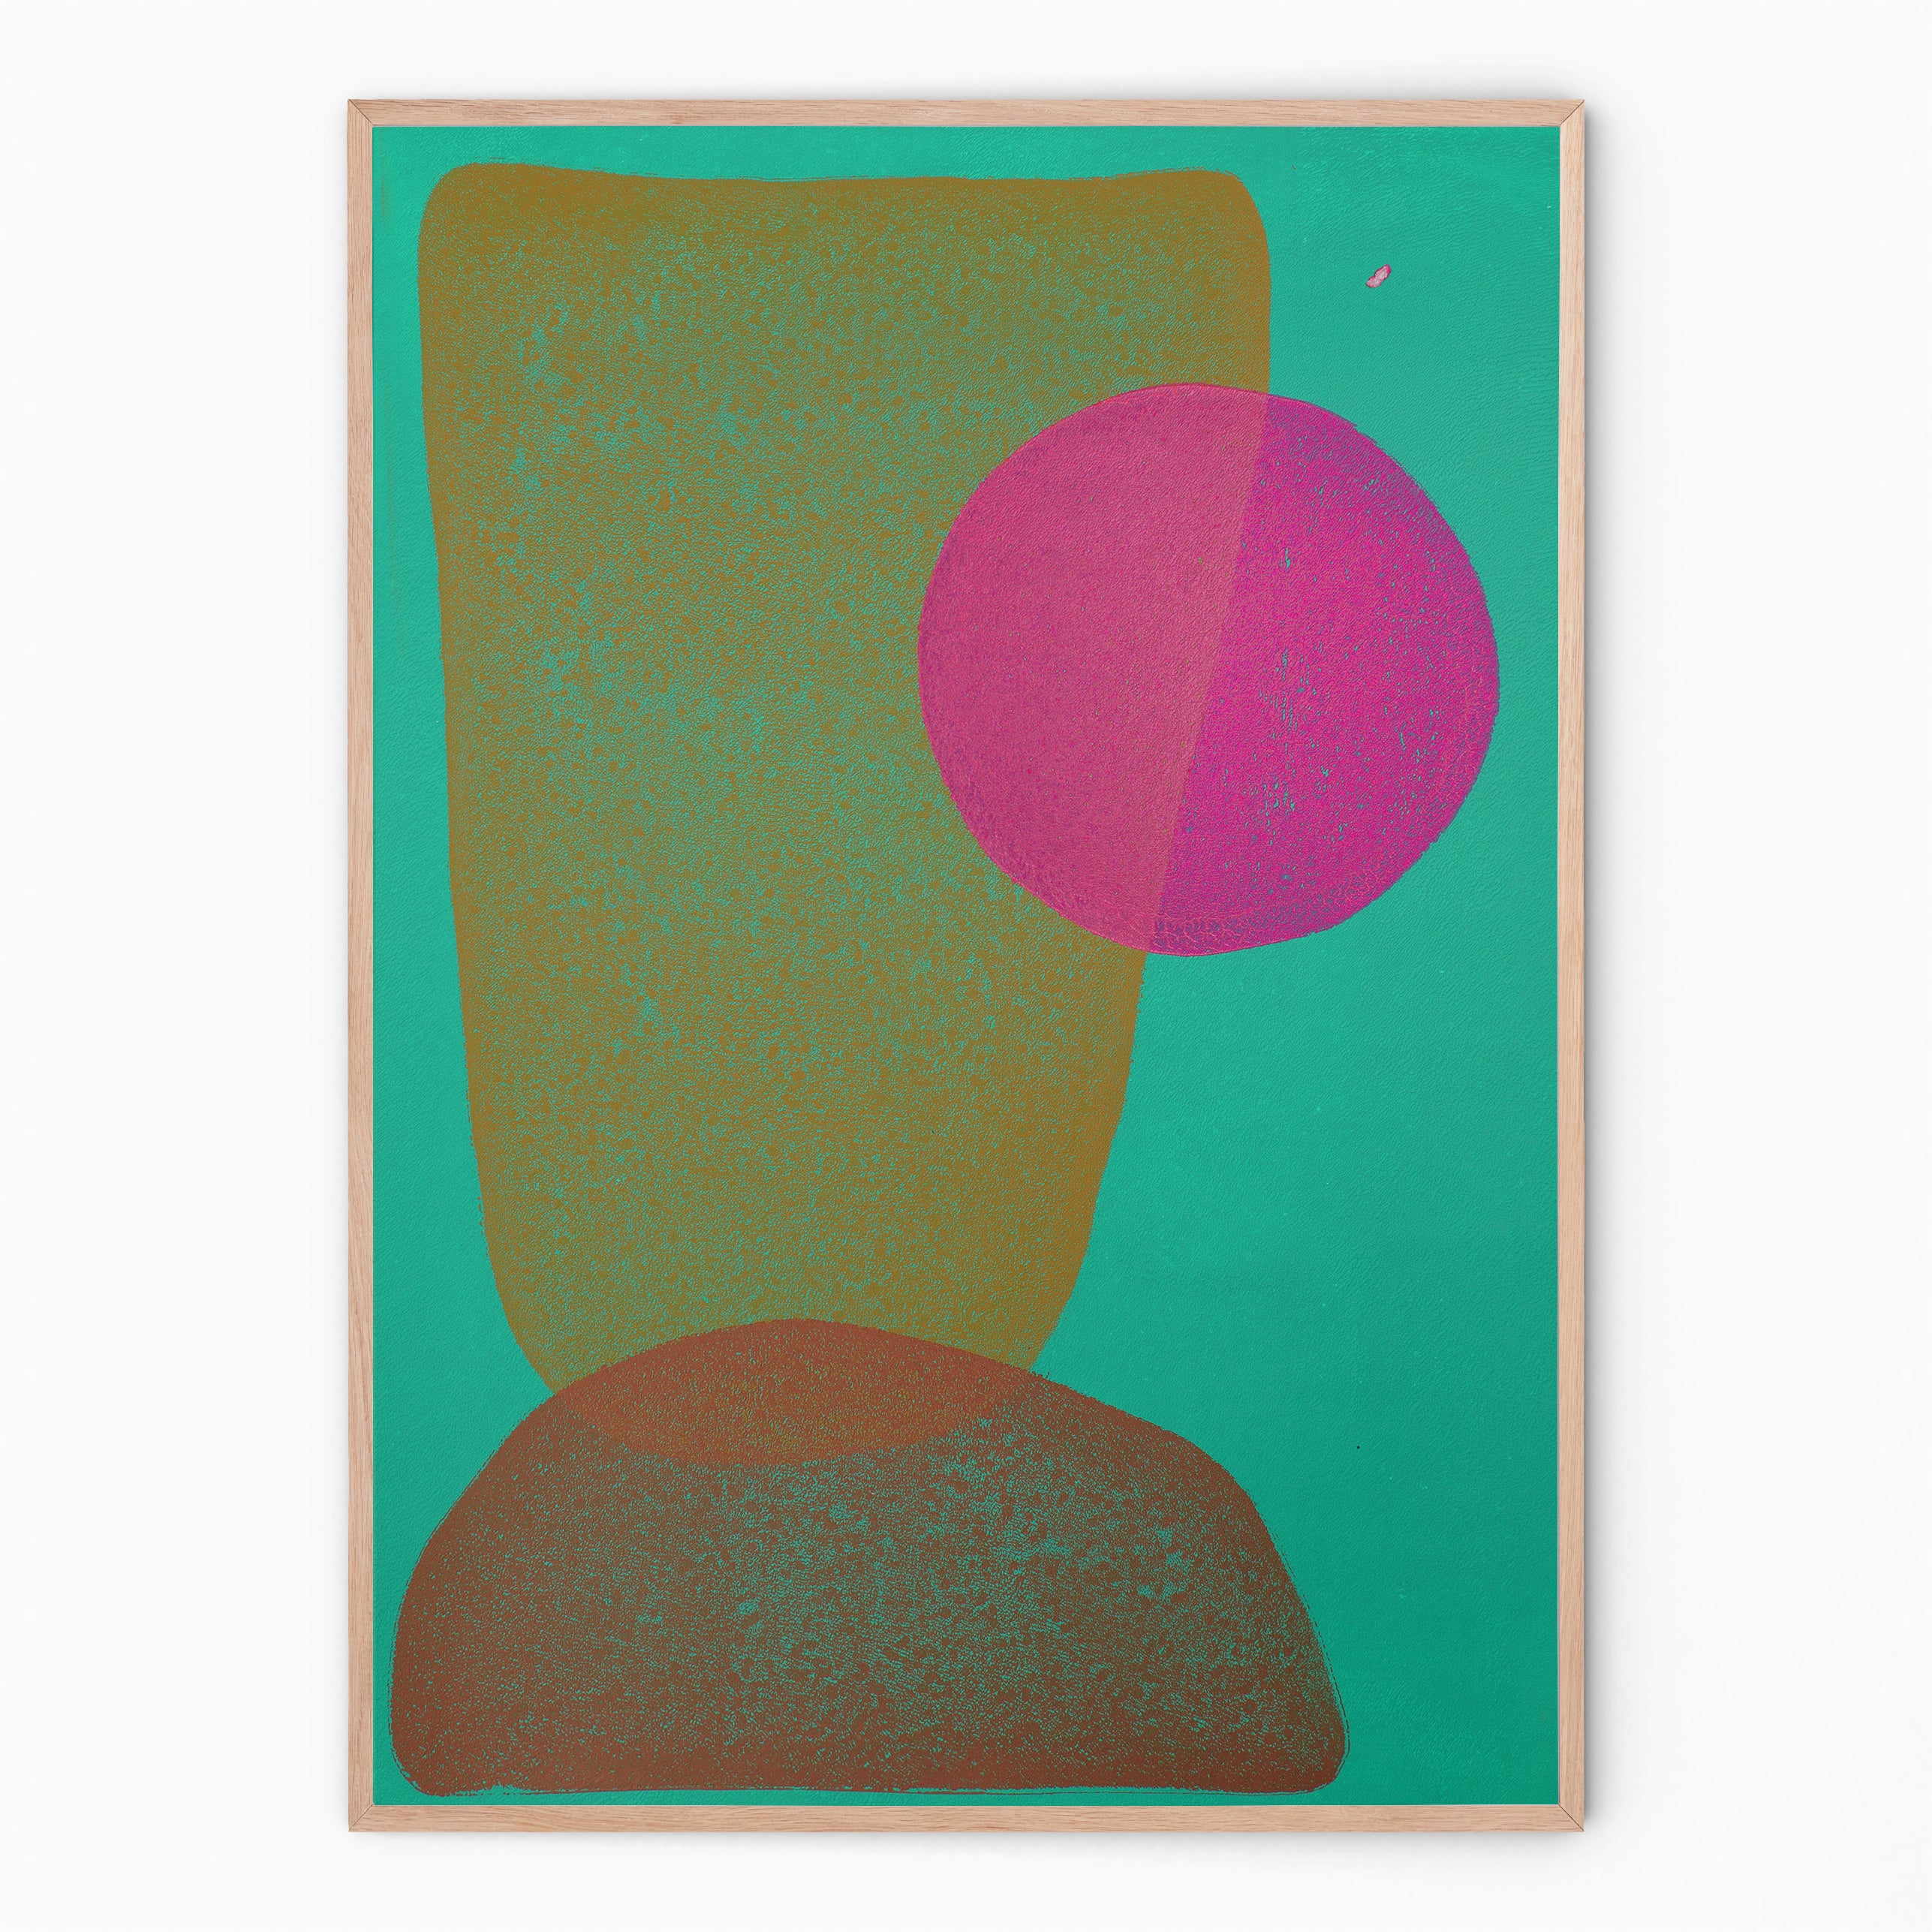 Colorful print with curved shapes I Handmade poster Enkel Art Studio